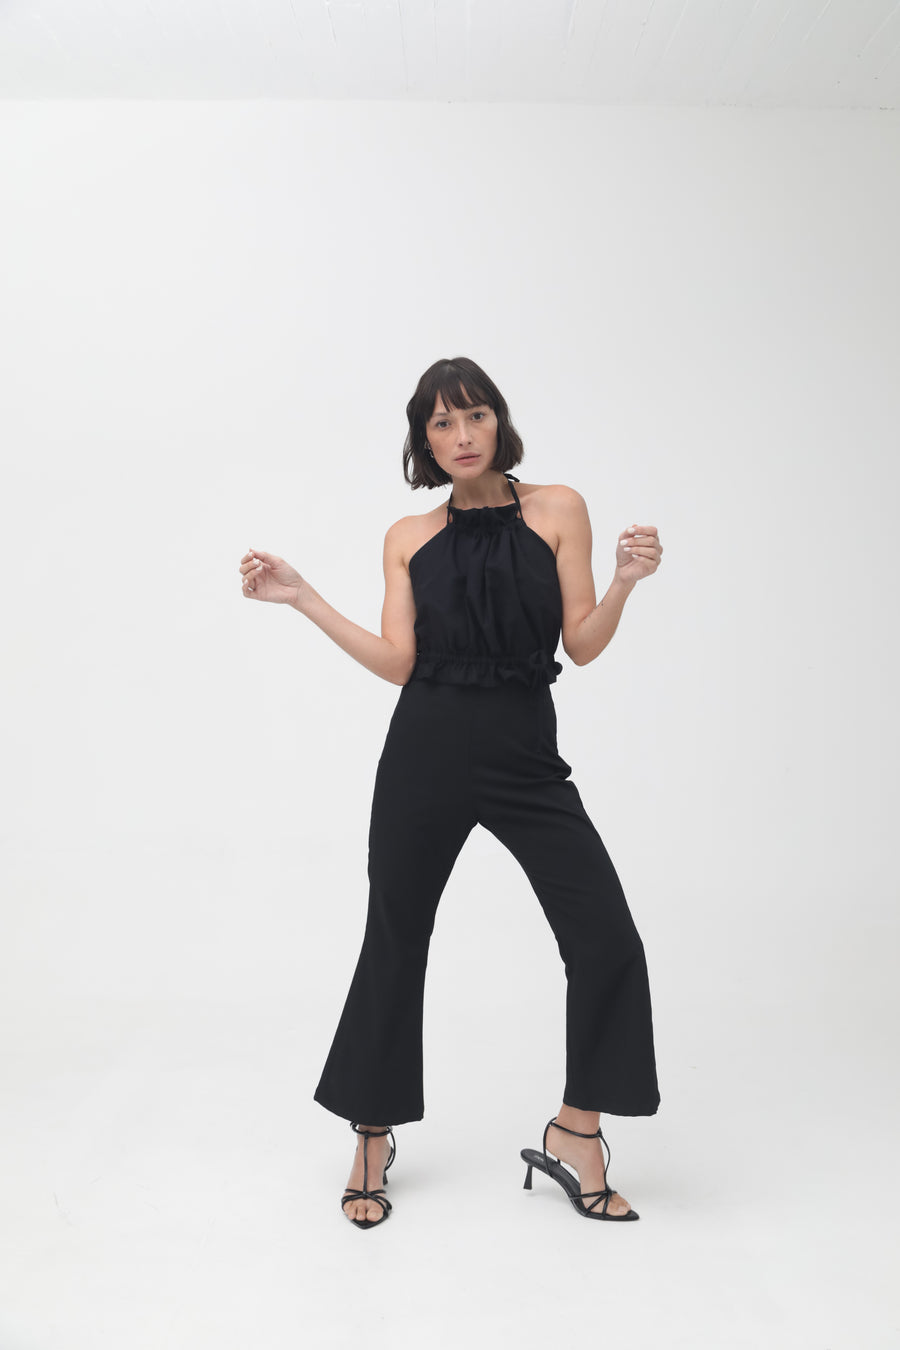 The Crop Flare Pant